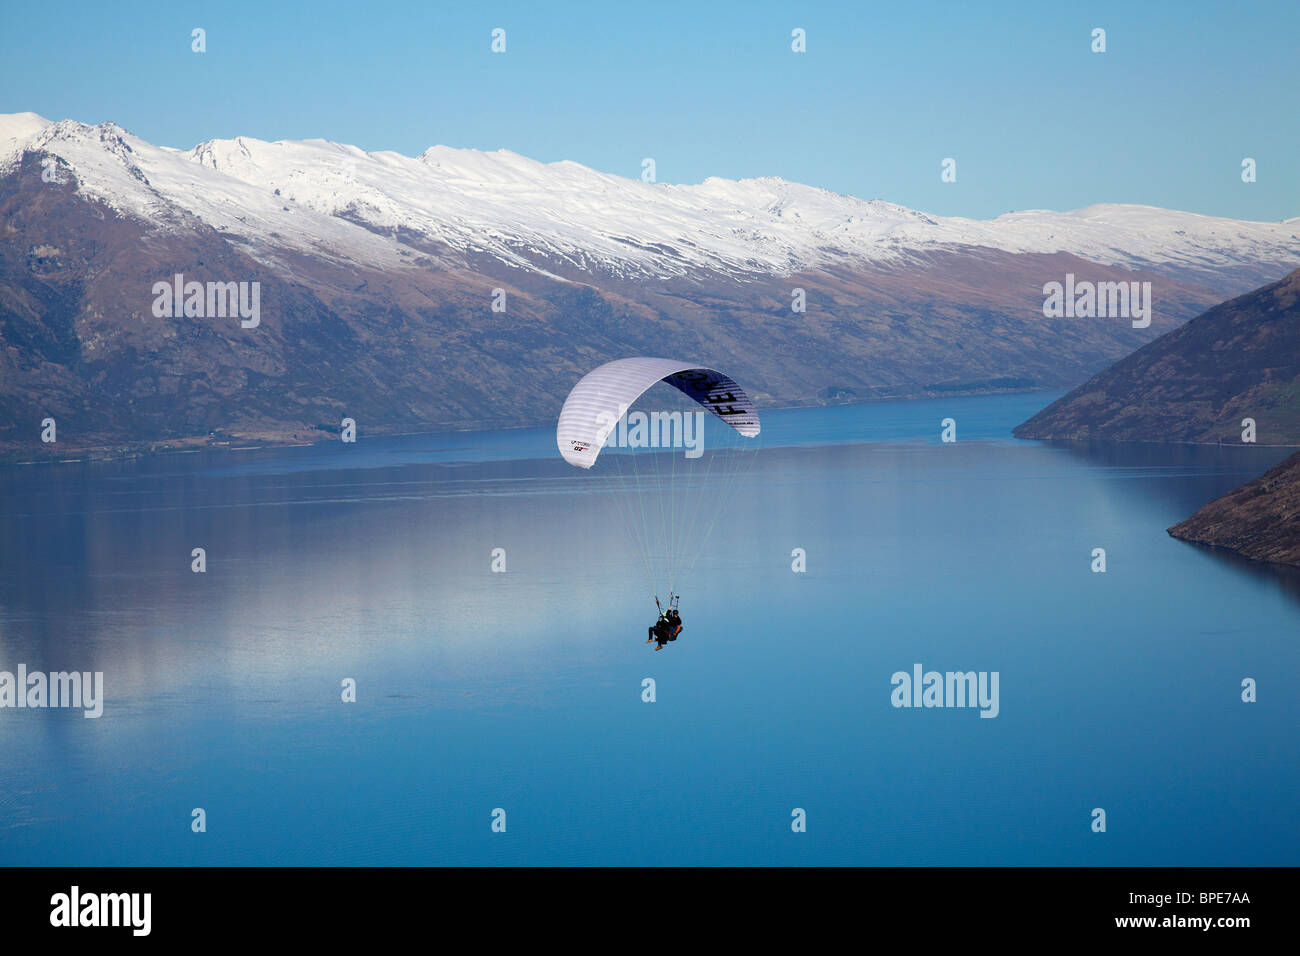 Paraglider, The Remarkables and Lake Wakatipu, Queenstown, South Island, New Zealand Stock Photo